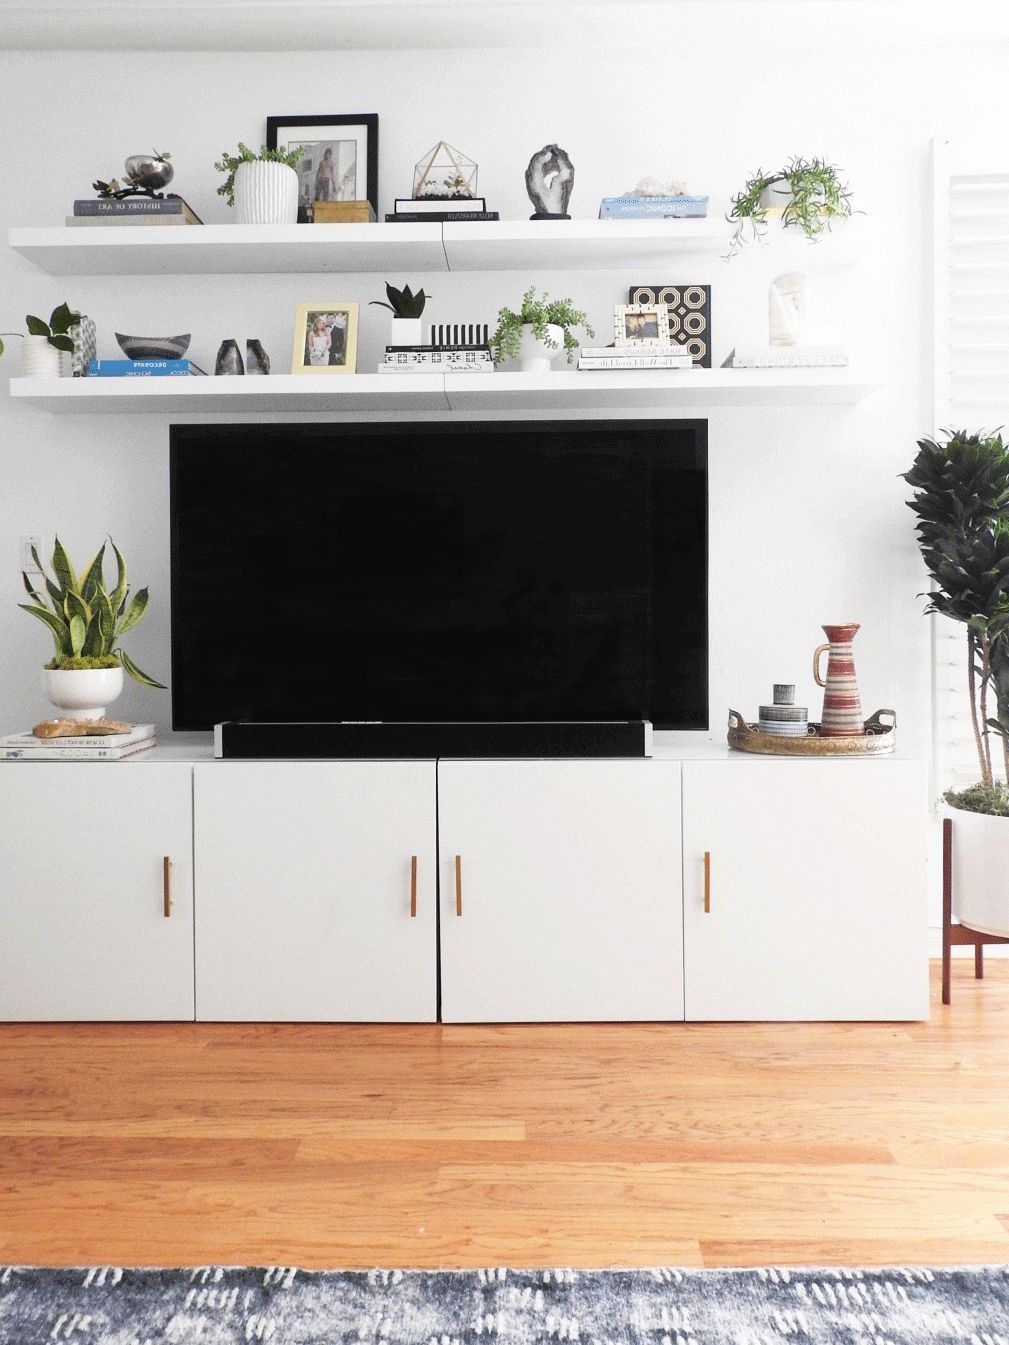 Ikea Besta Tv Stand Hack With Two Lack Shelves Above | Natasha With Willa 80 Inch Tv Stands (Gallery 15 of 20)